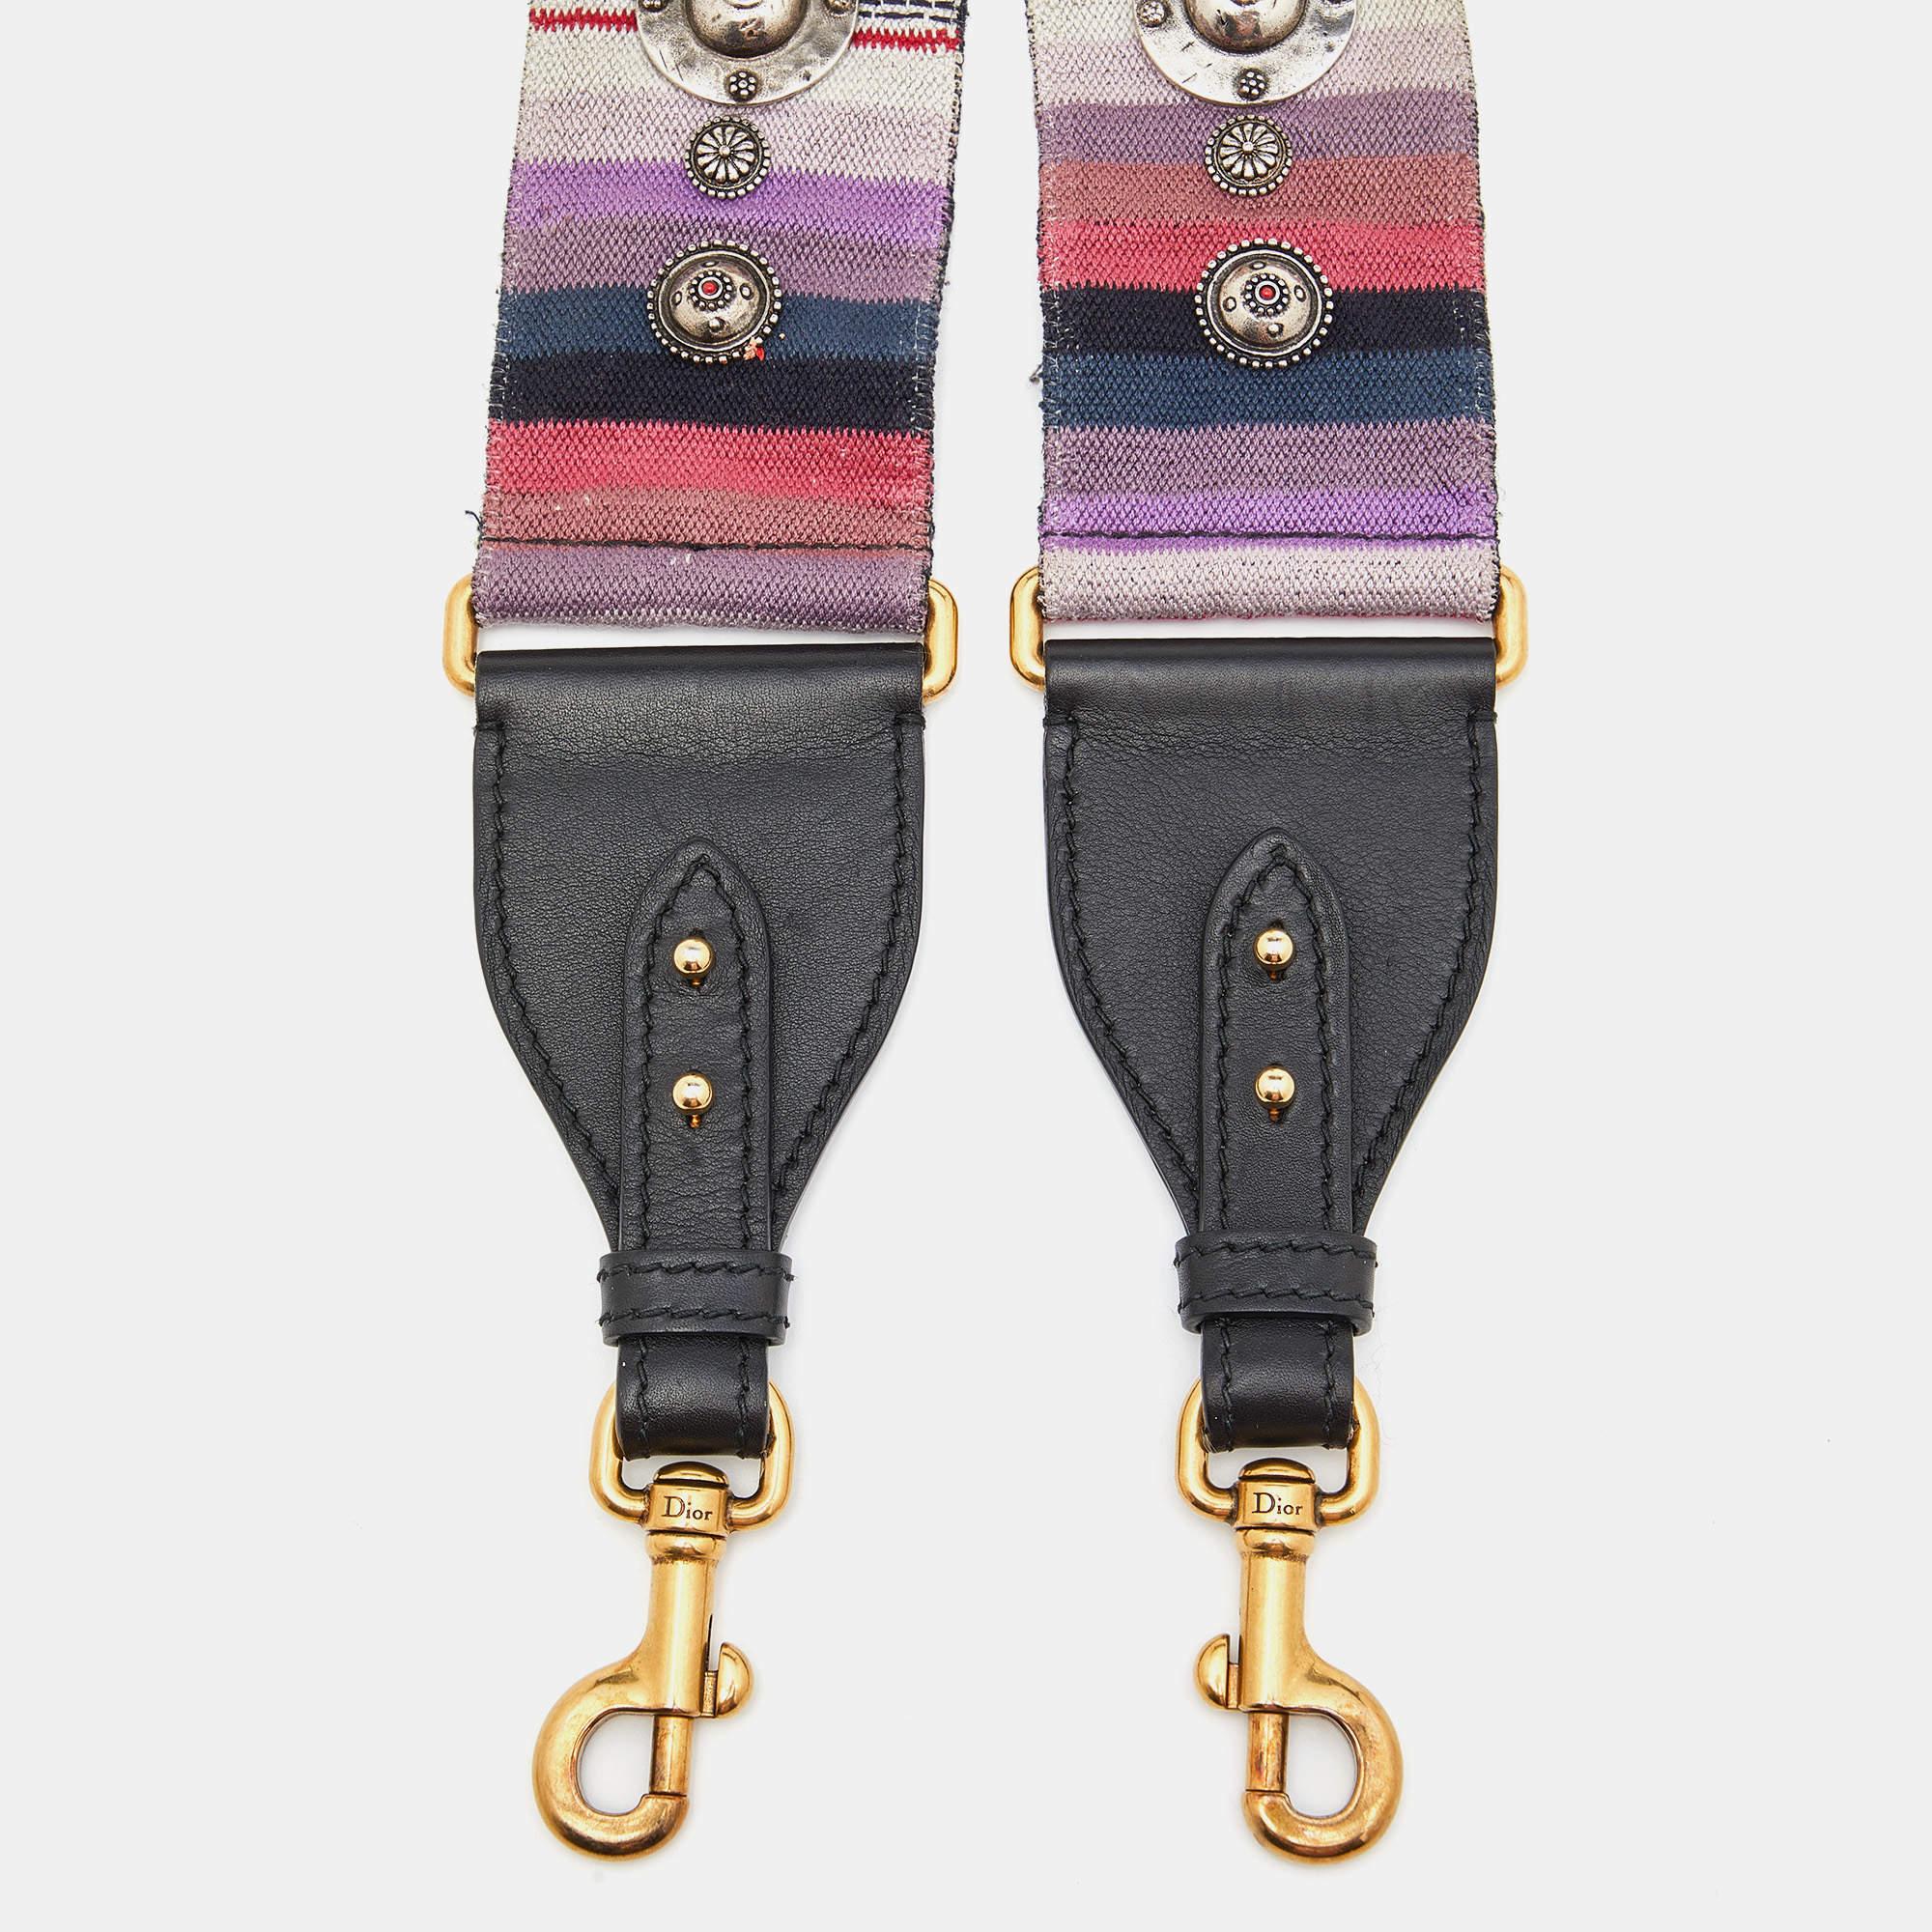 Dior brings you this super-chic shoulder strap that you can flaunt with your great collection of handbags. The strap is made from studded canvas & leather and is complete with two metal clasps.

